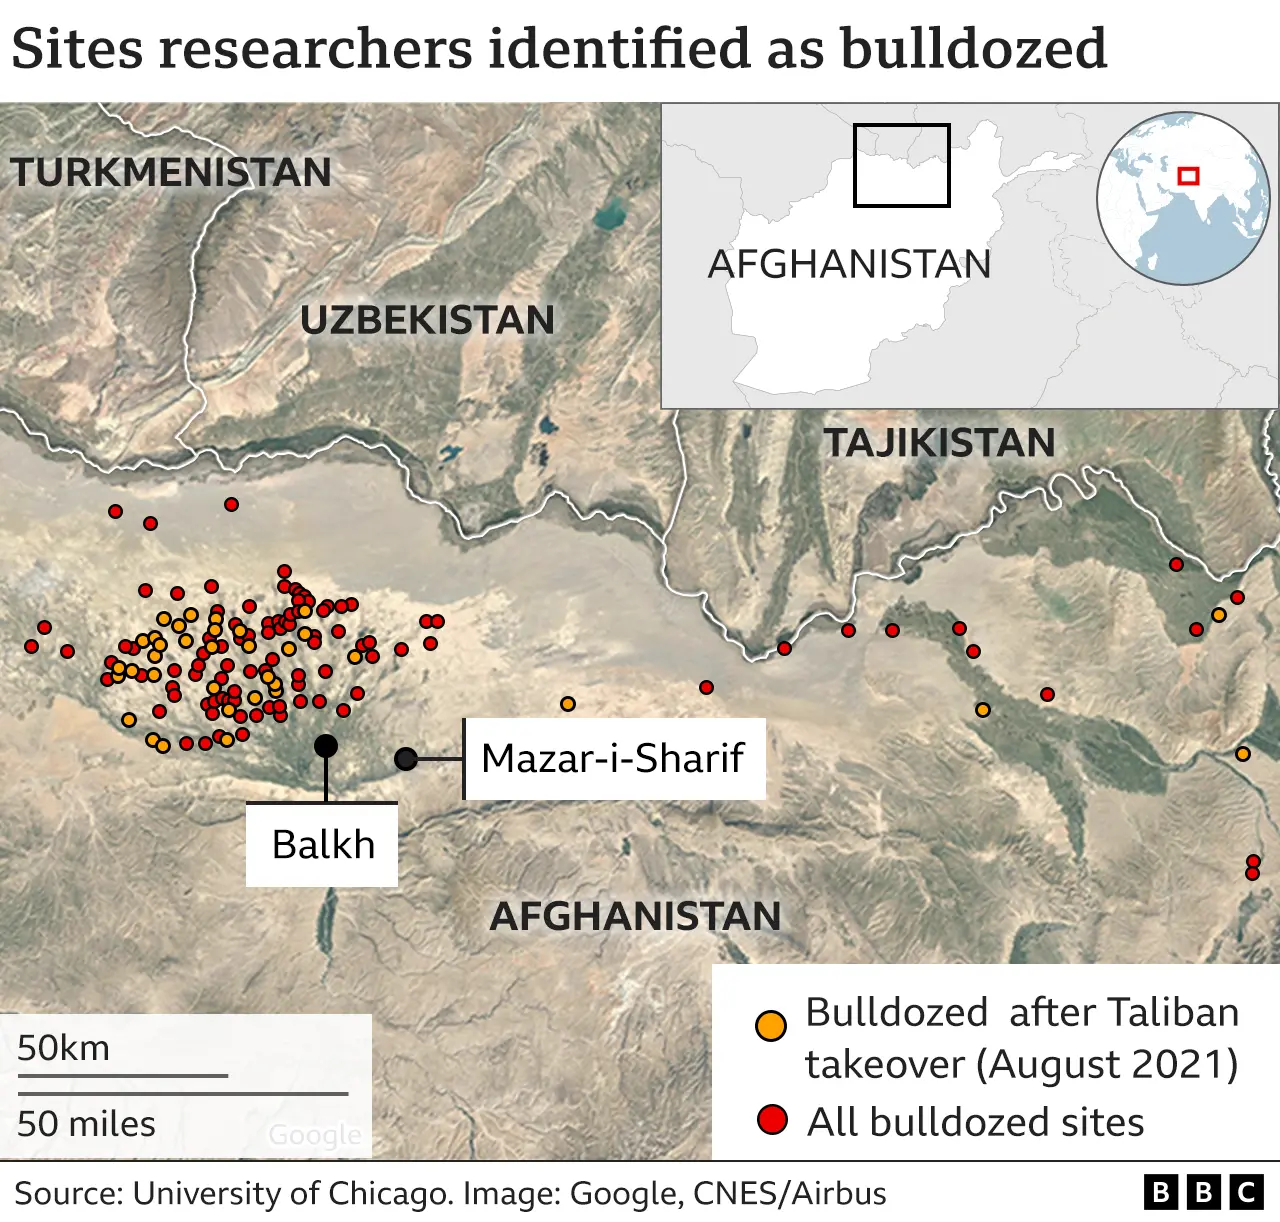 Map graphic showing locations of sites identified by Chicago University researchers as bulldozed, most are clustered in the Balkh region west of Mazar-i-Sharif